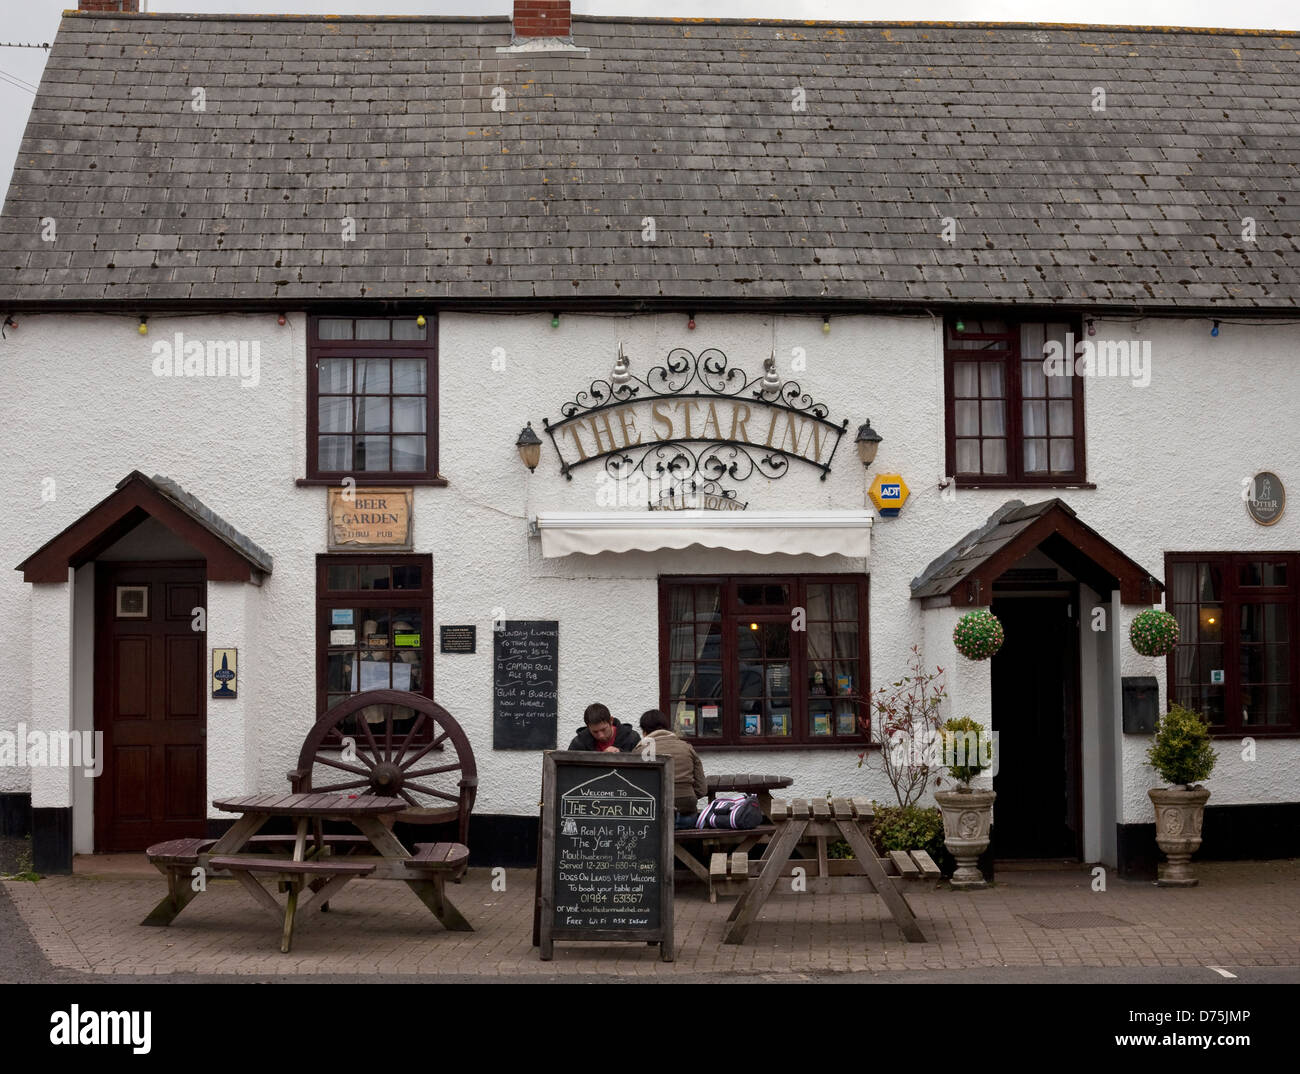 the star inn at Watchet Somerset a real ale public house Stock Photo